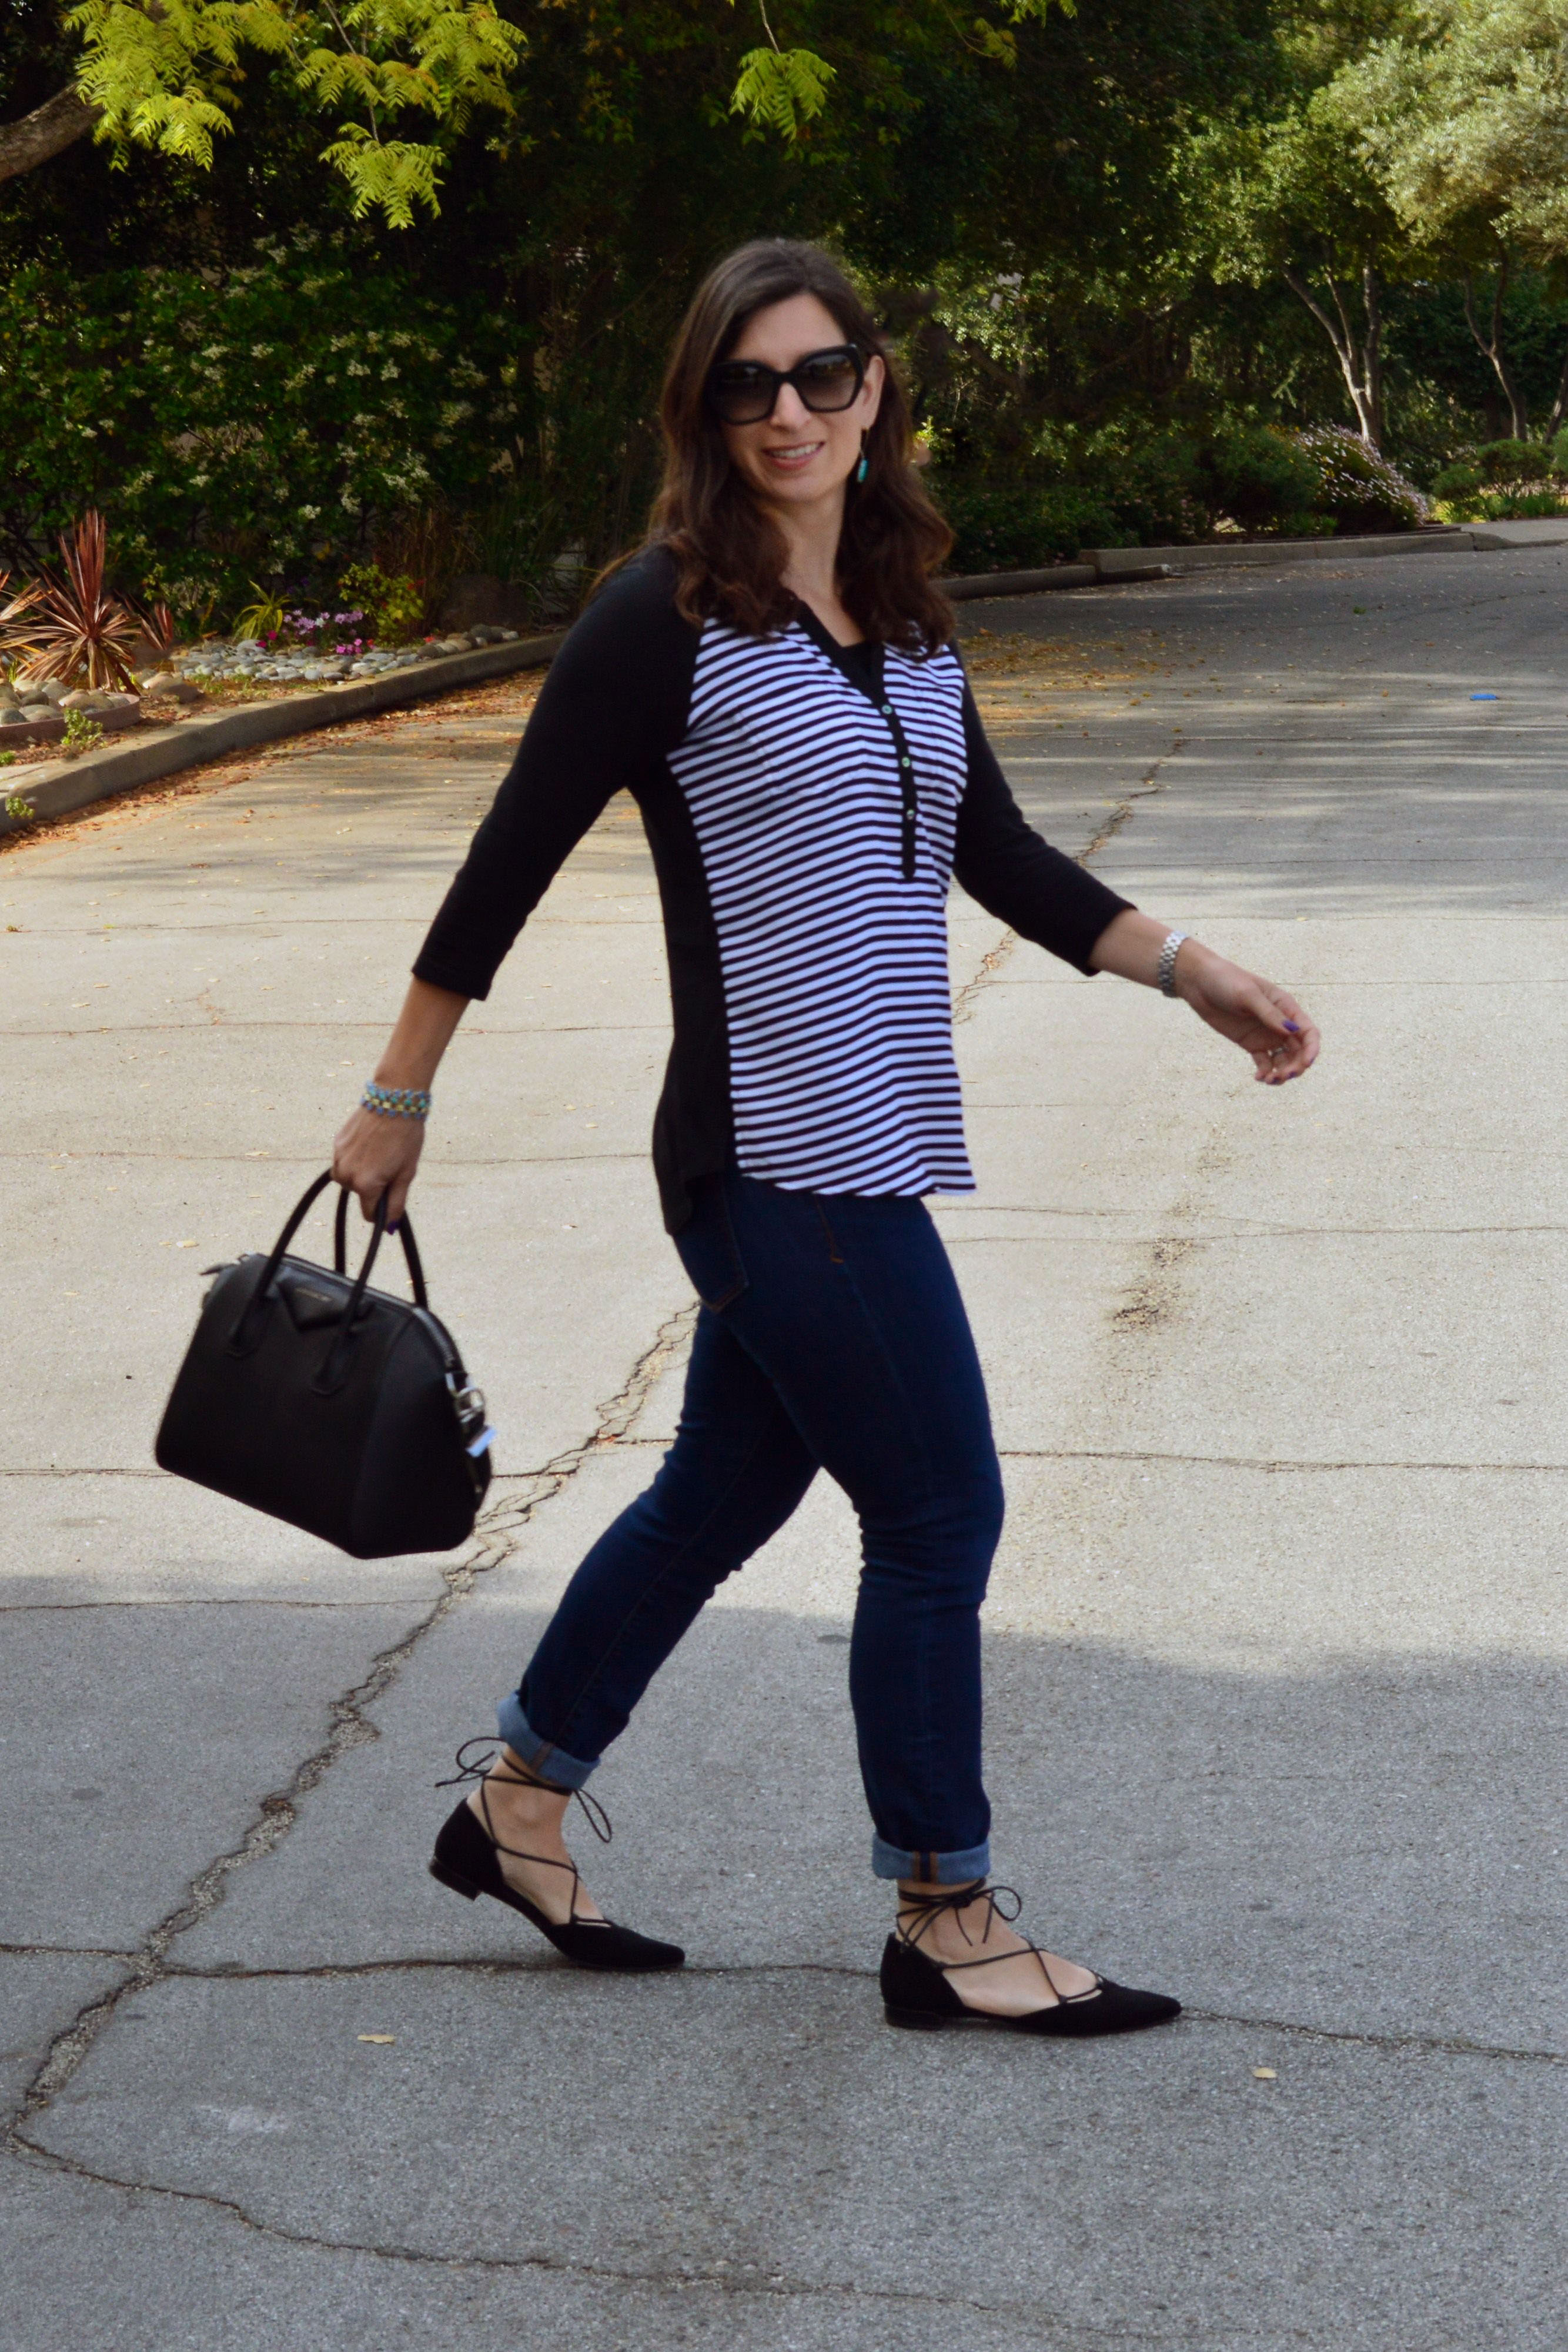 CHANEL BALLET FLATS REVIEW + OUTFIT IDEAS / 5 SPRING OUTFITS